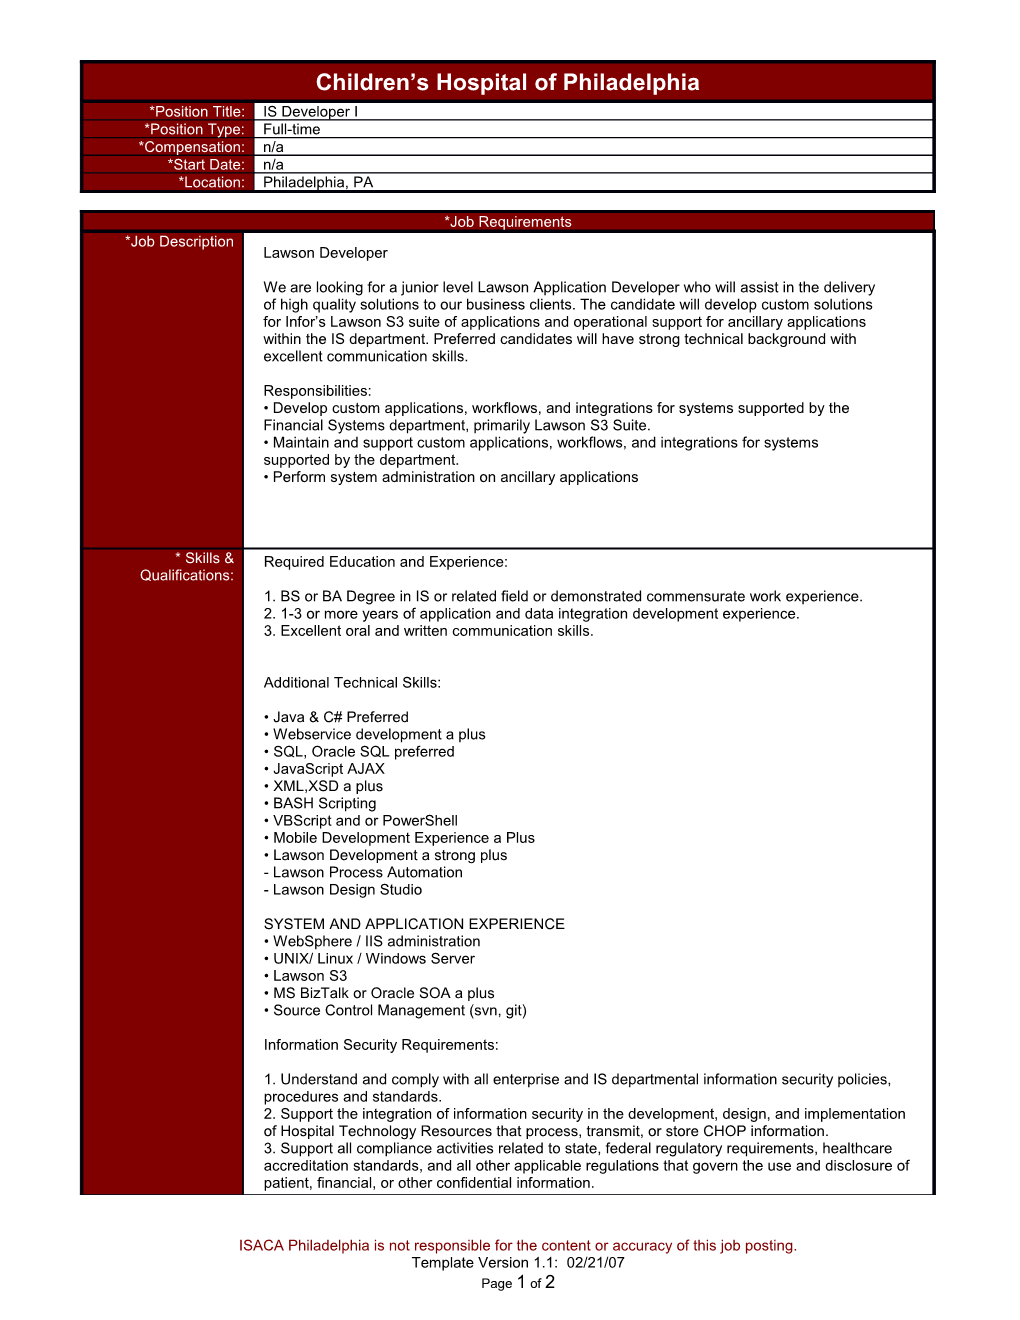 ISACA Philadelphia Is Not Responsible for the Content Or Accuracy of This Job Posting